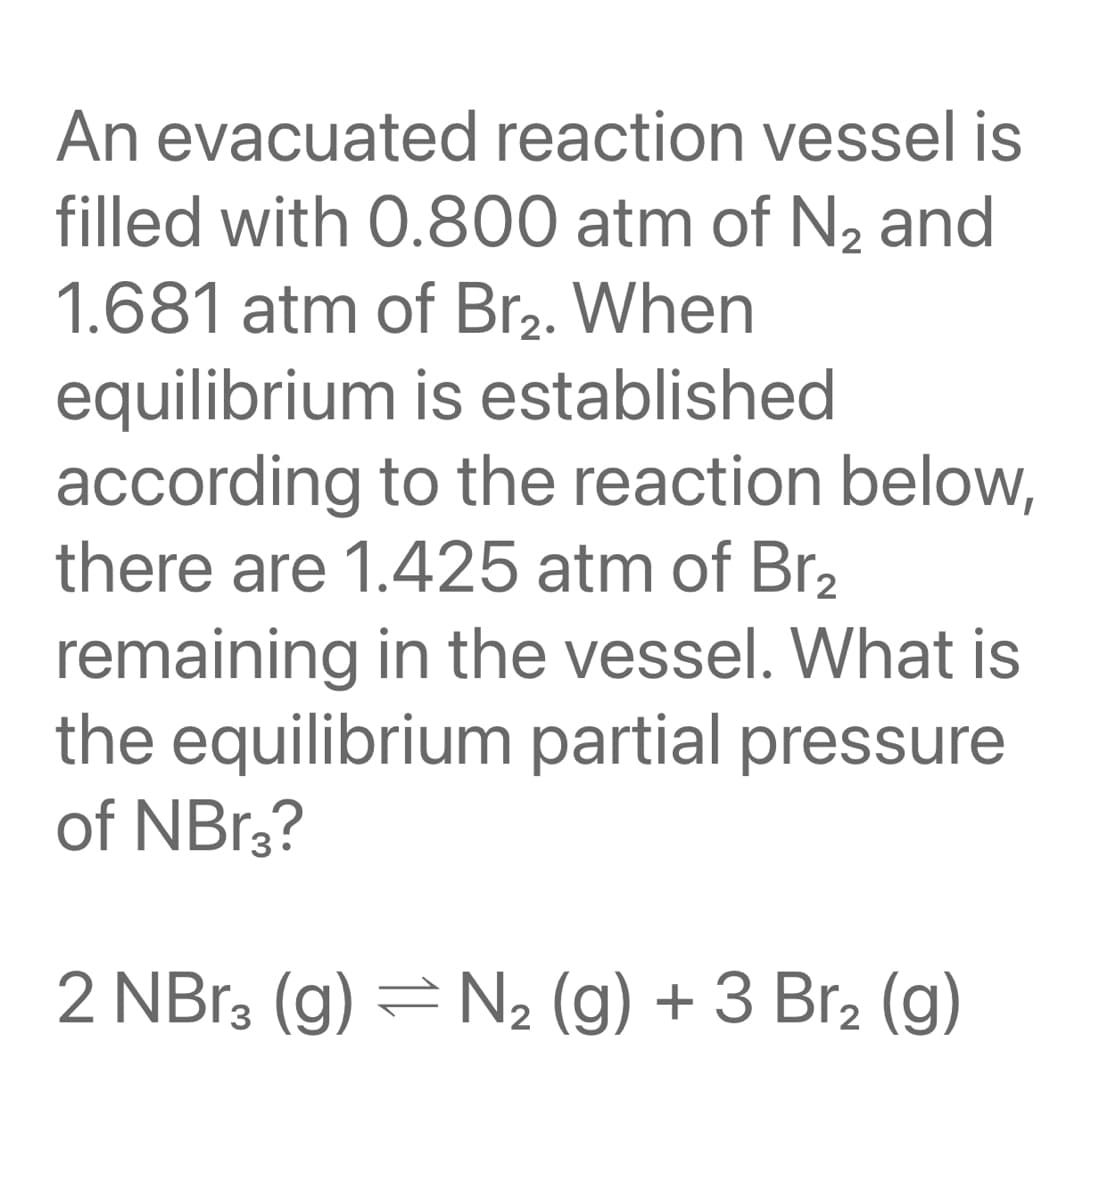 An evacuated reaction vessel is
filled with 0.800 atm of N2 and
1.681 atm of Br2. When
equilibrium is established
according to the reaction below,
there are 1.425 atm of Br2
remaining in the vessel. What is
the equilibrium partial pressure
of NBr3?
2 NBr3 (g) = N2 (g) + 3 Br2 (g)
